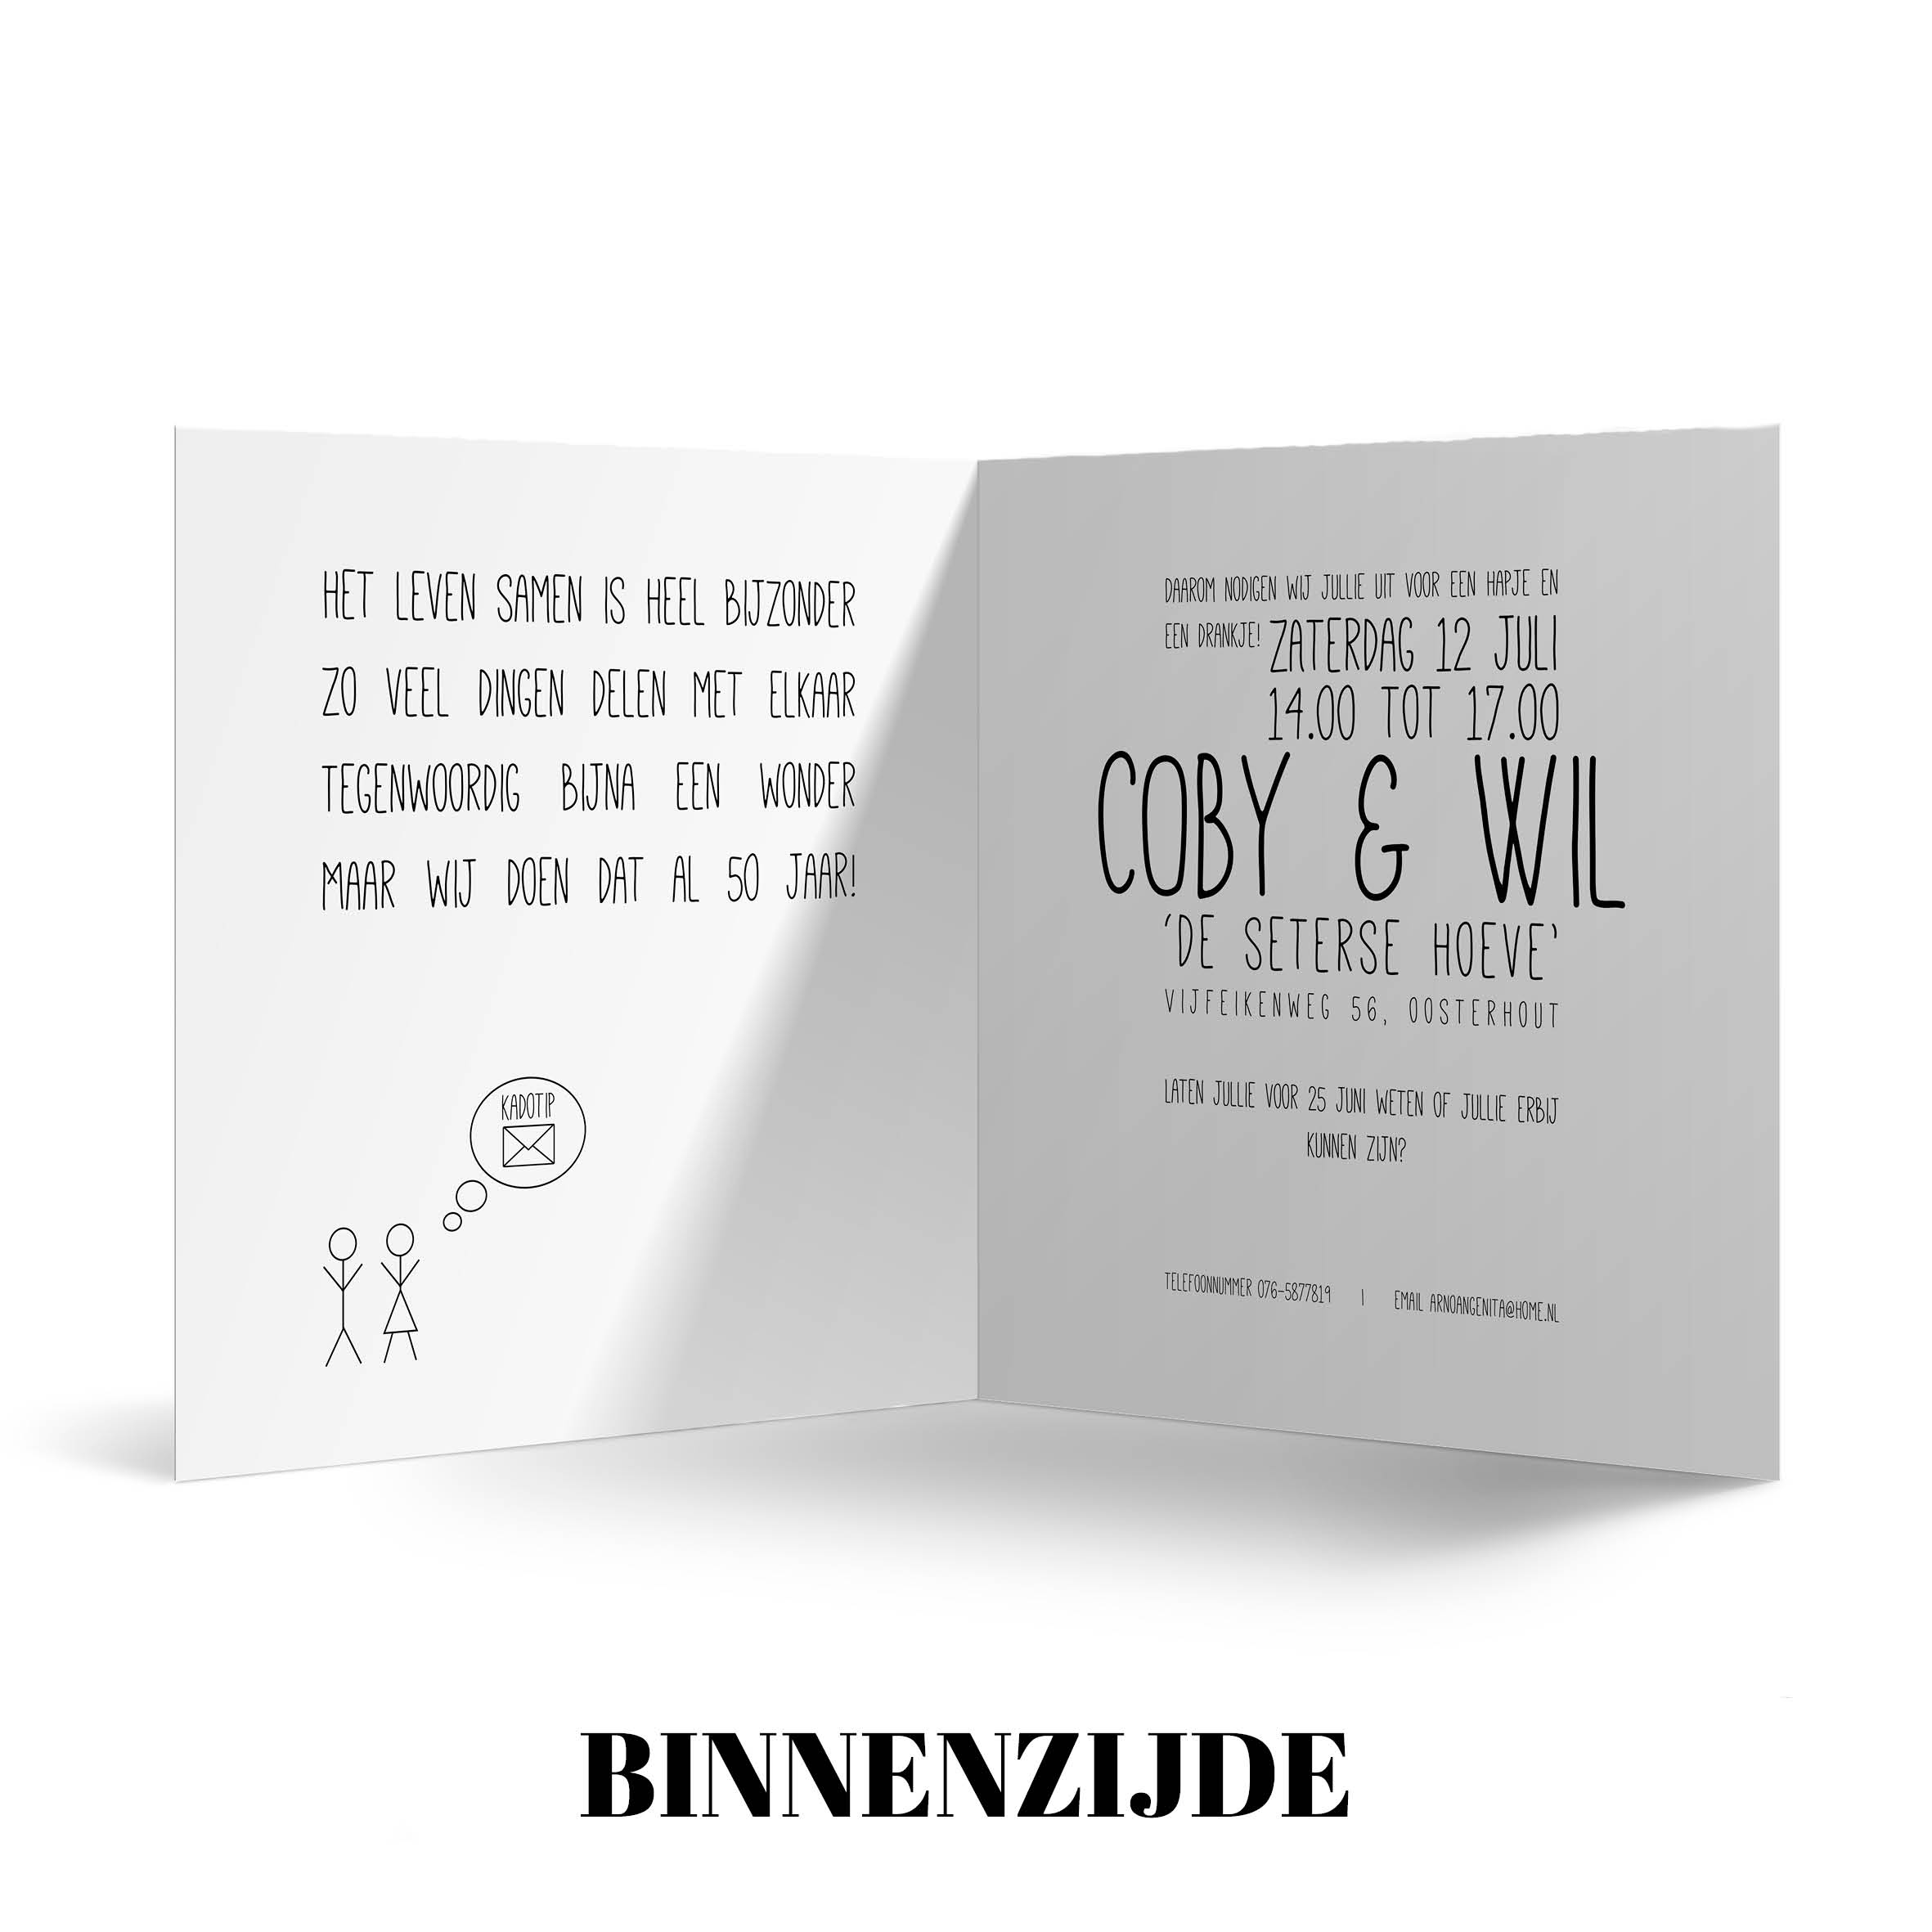 Uitnodiging Coby & Wil4